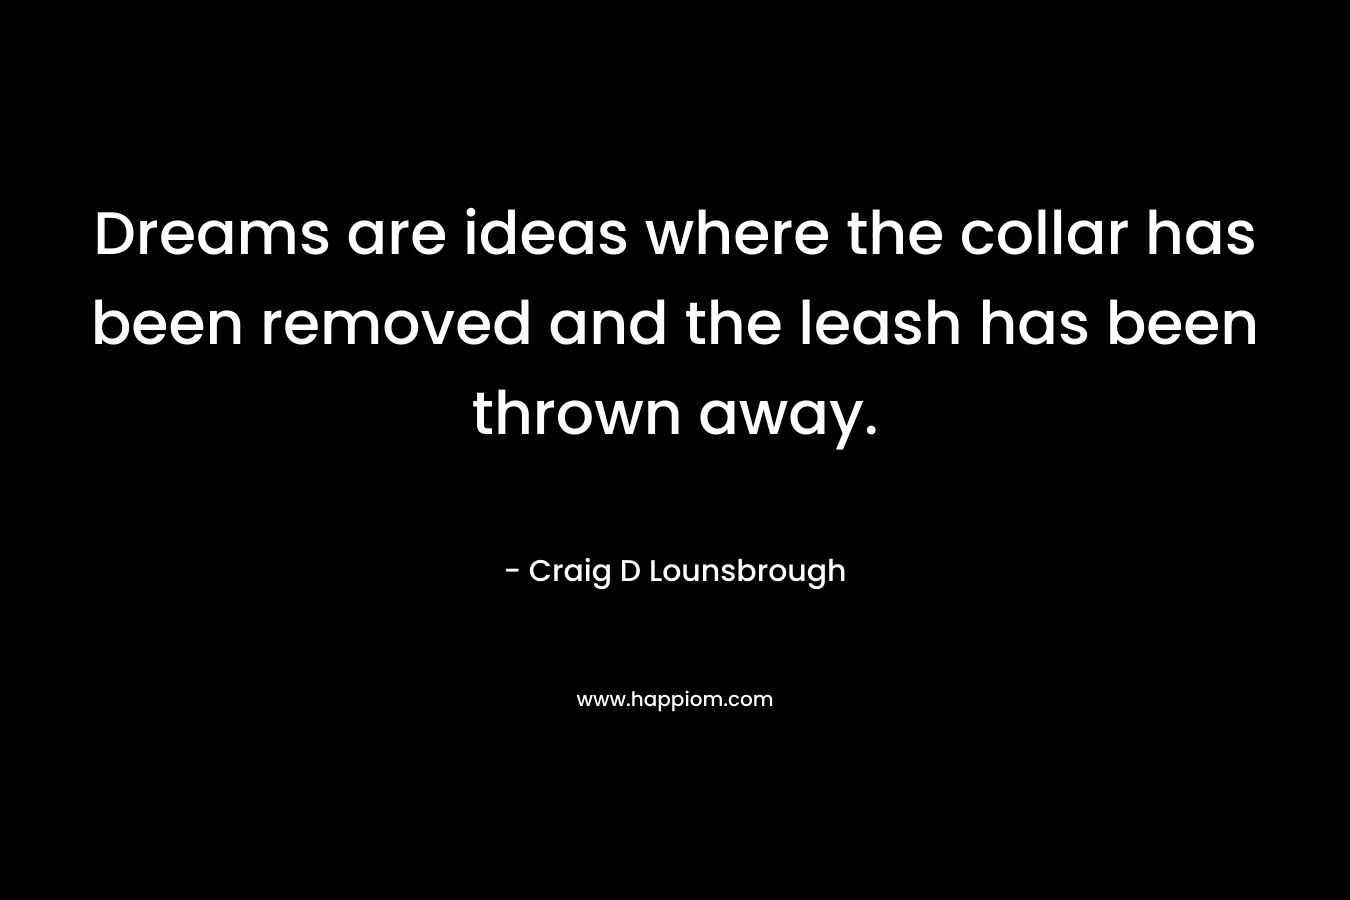 Dreams are ideas where the collar has been removed and the leash has been thrown away.